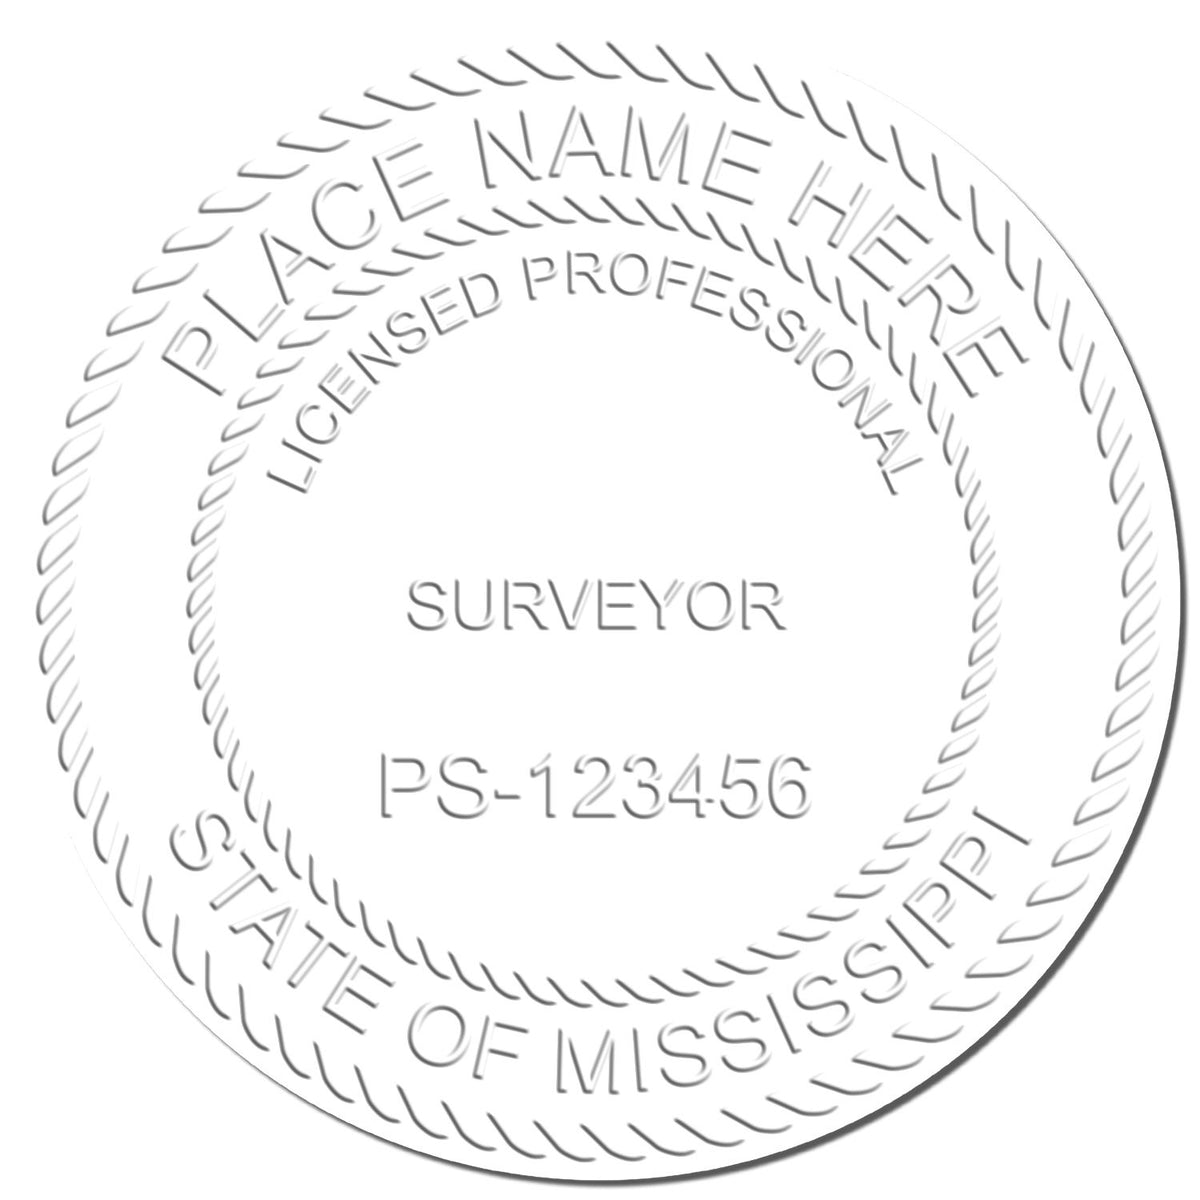 This paper is stamped with a sample imprint of the Handheld Mississippi Land Surveyor Seal, signifying its quality and reliability.